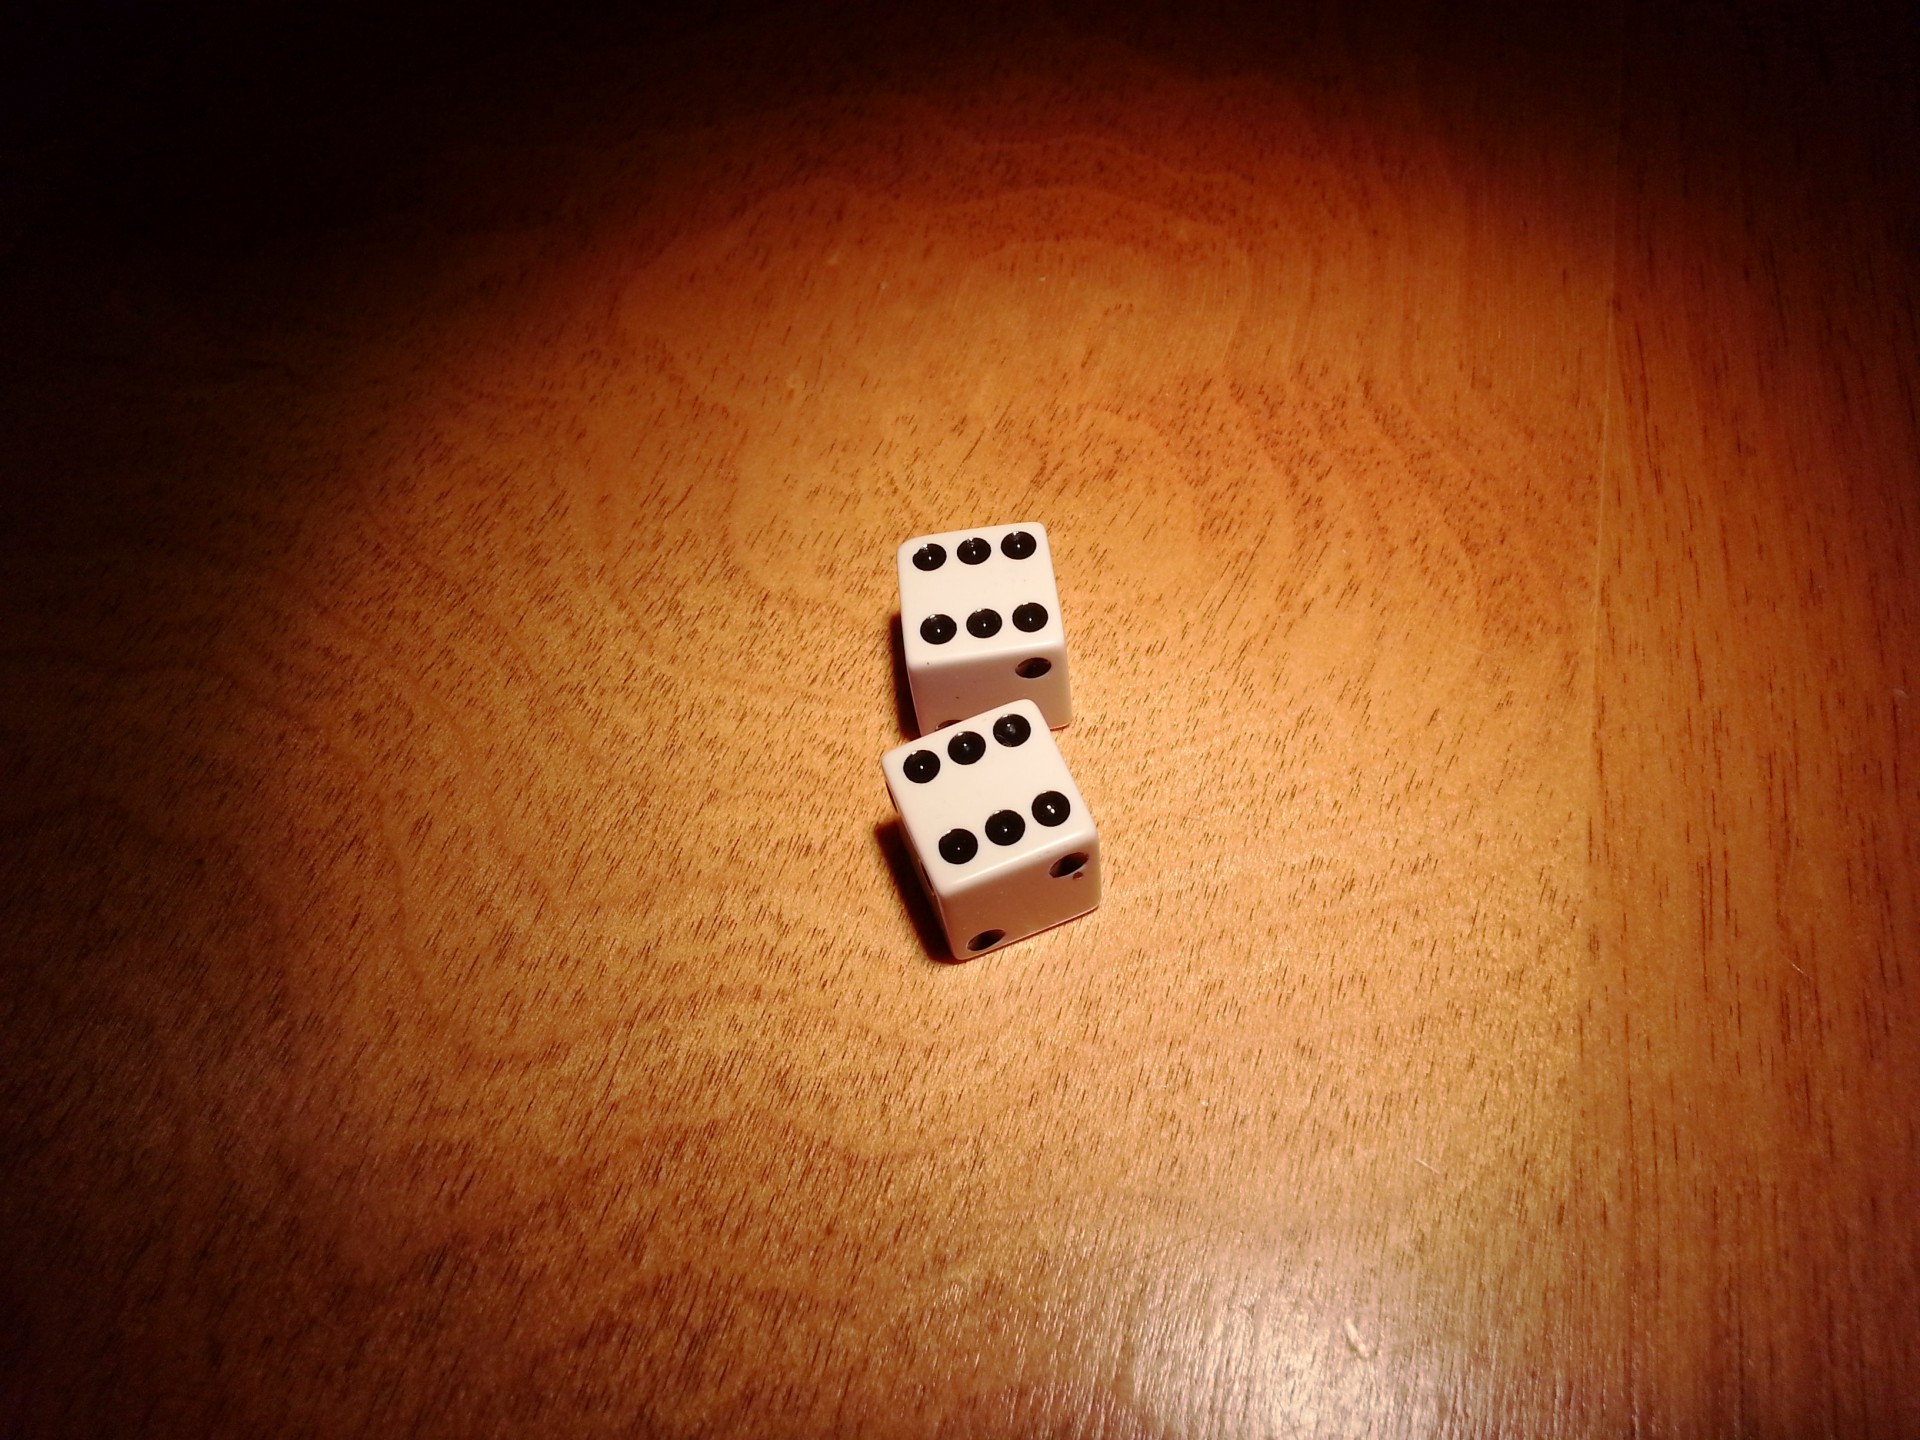 Dice with double sixes